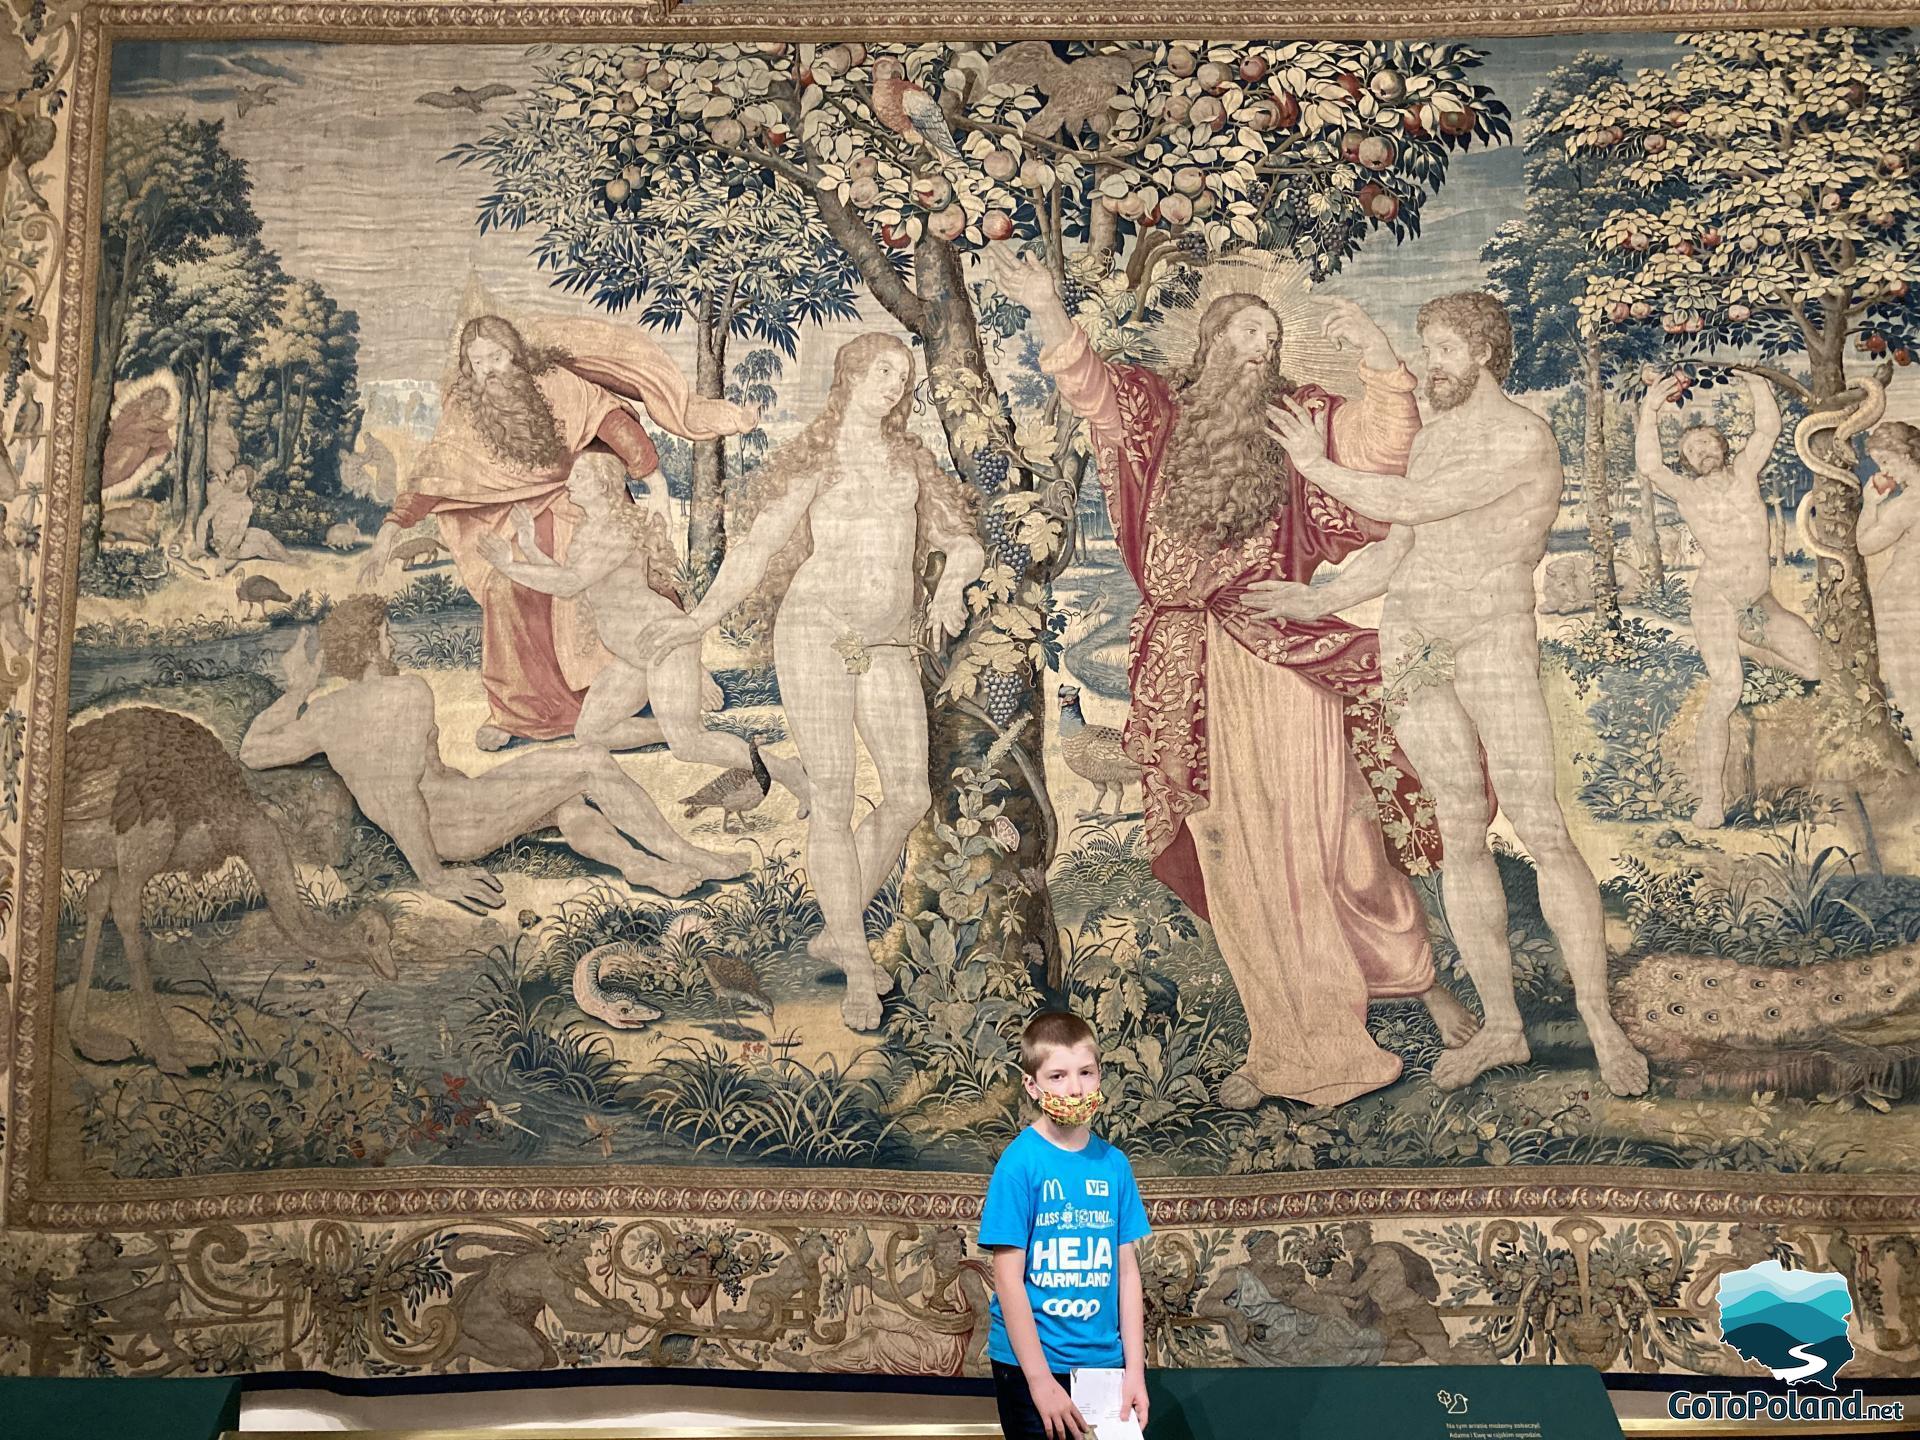 a boy is standing in front of the tapestry, on the tapestry is a religious scene